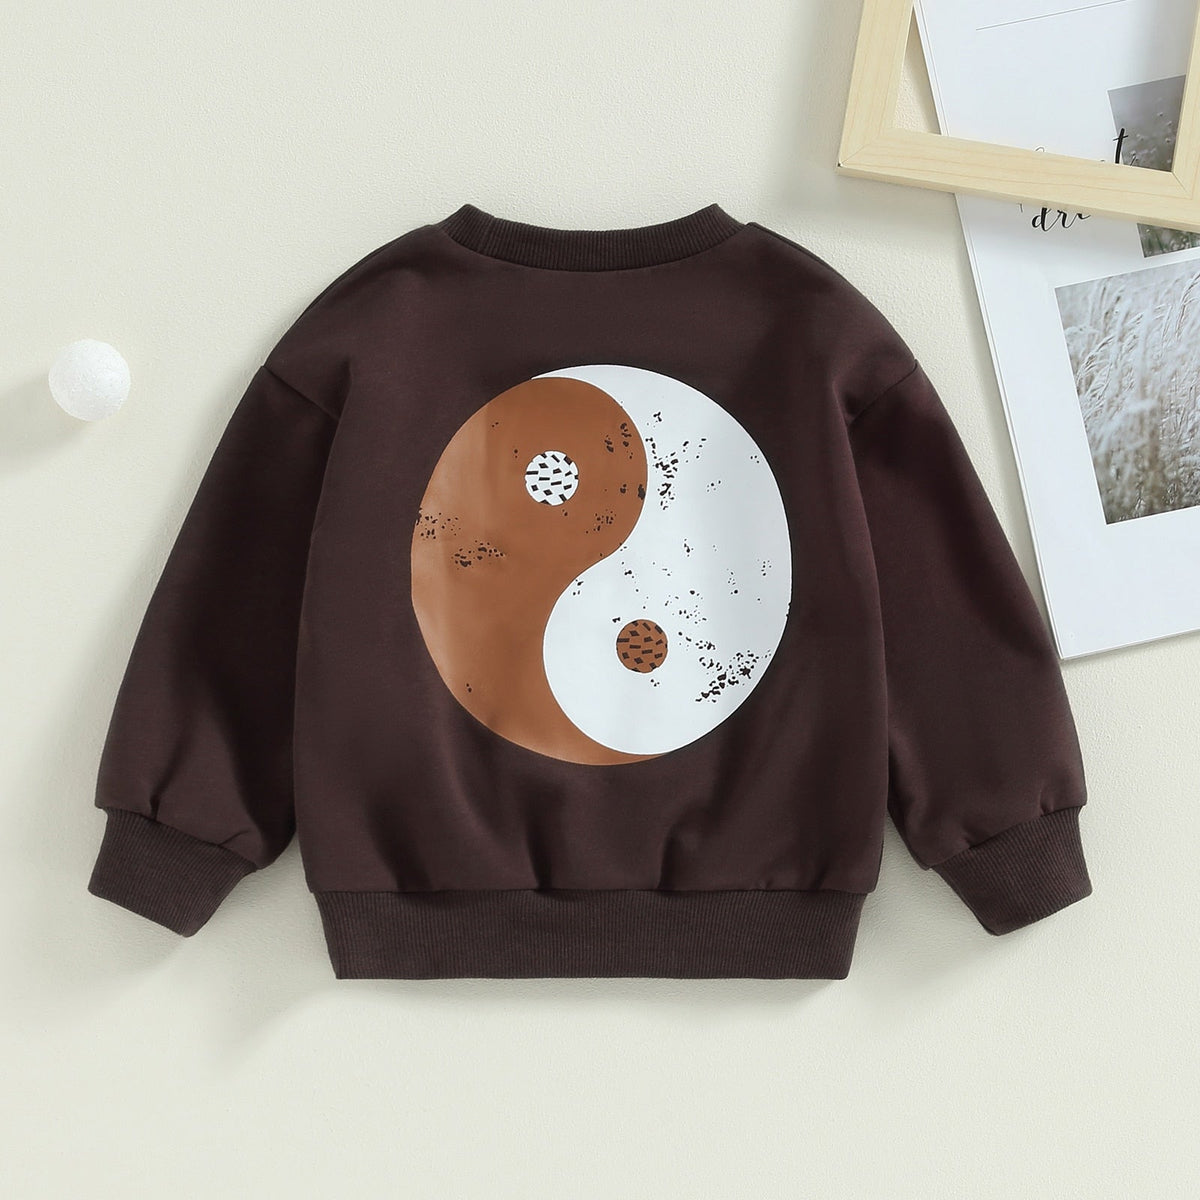 Bubs Ying Yang Crewneck - The Ollie Bee